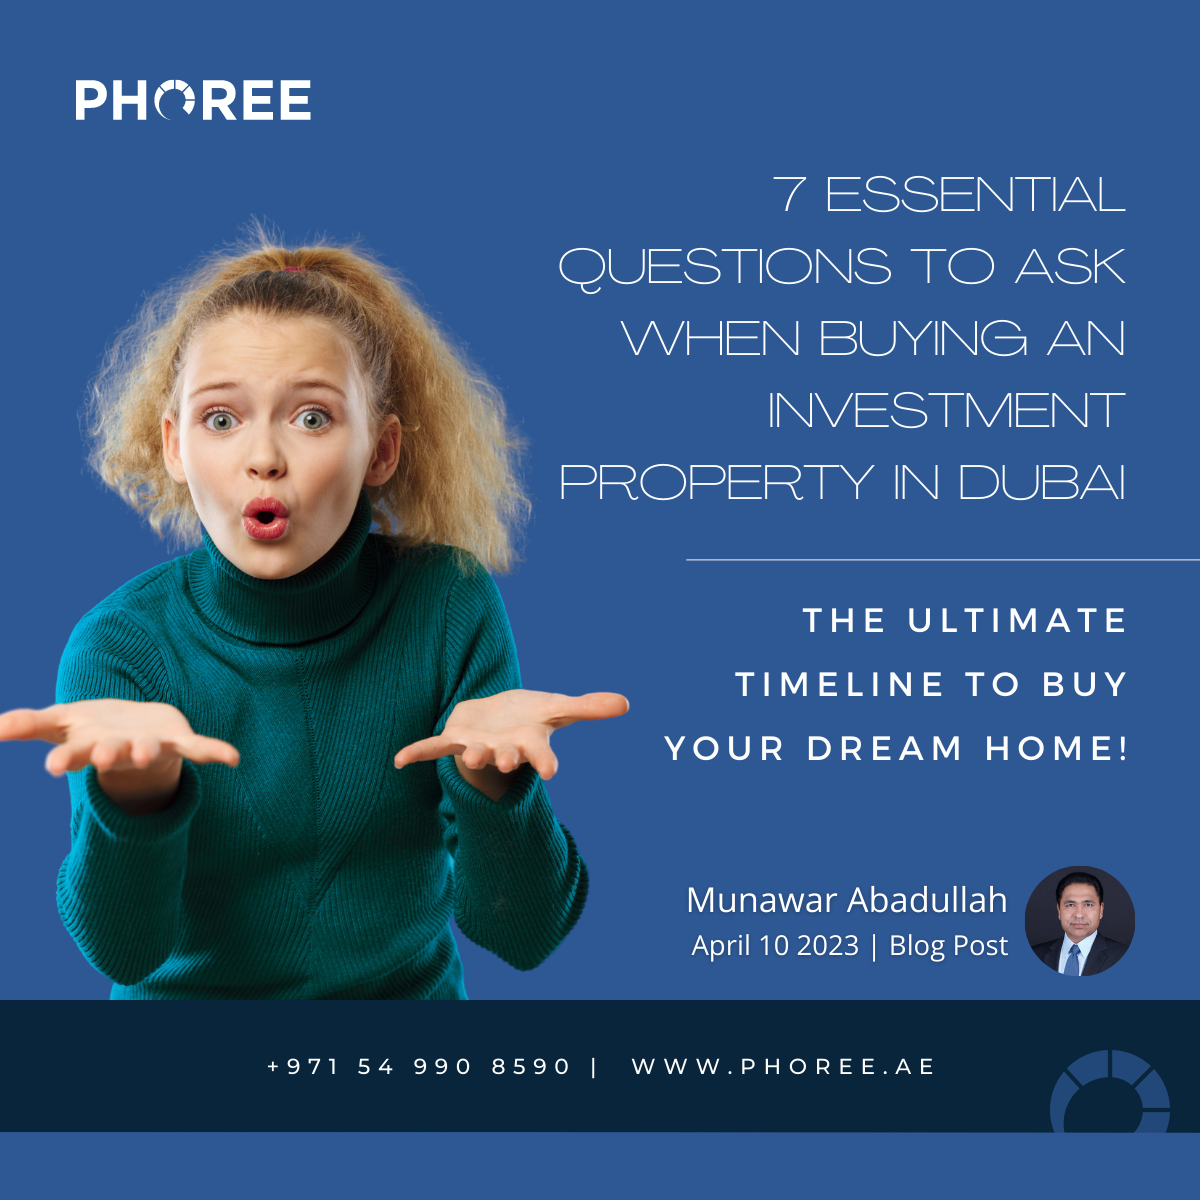 7-essential-questions-to-ask-when-buying-an-investment-property-in-dubai.png